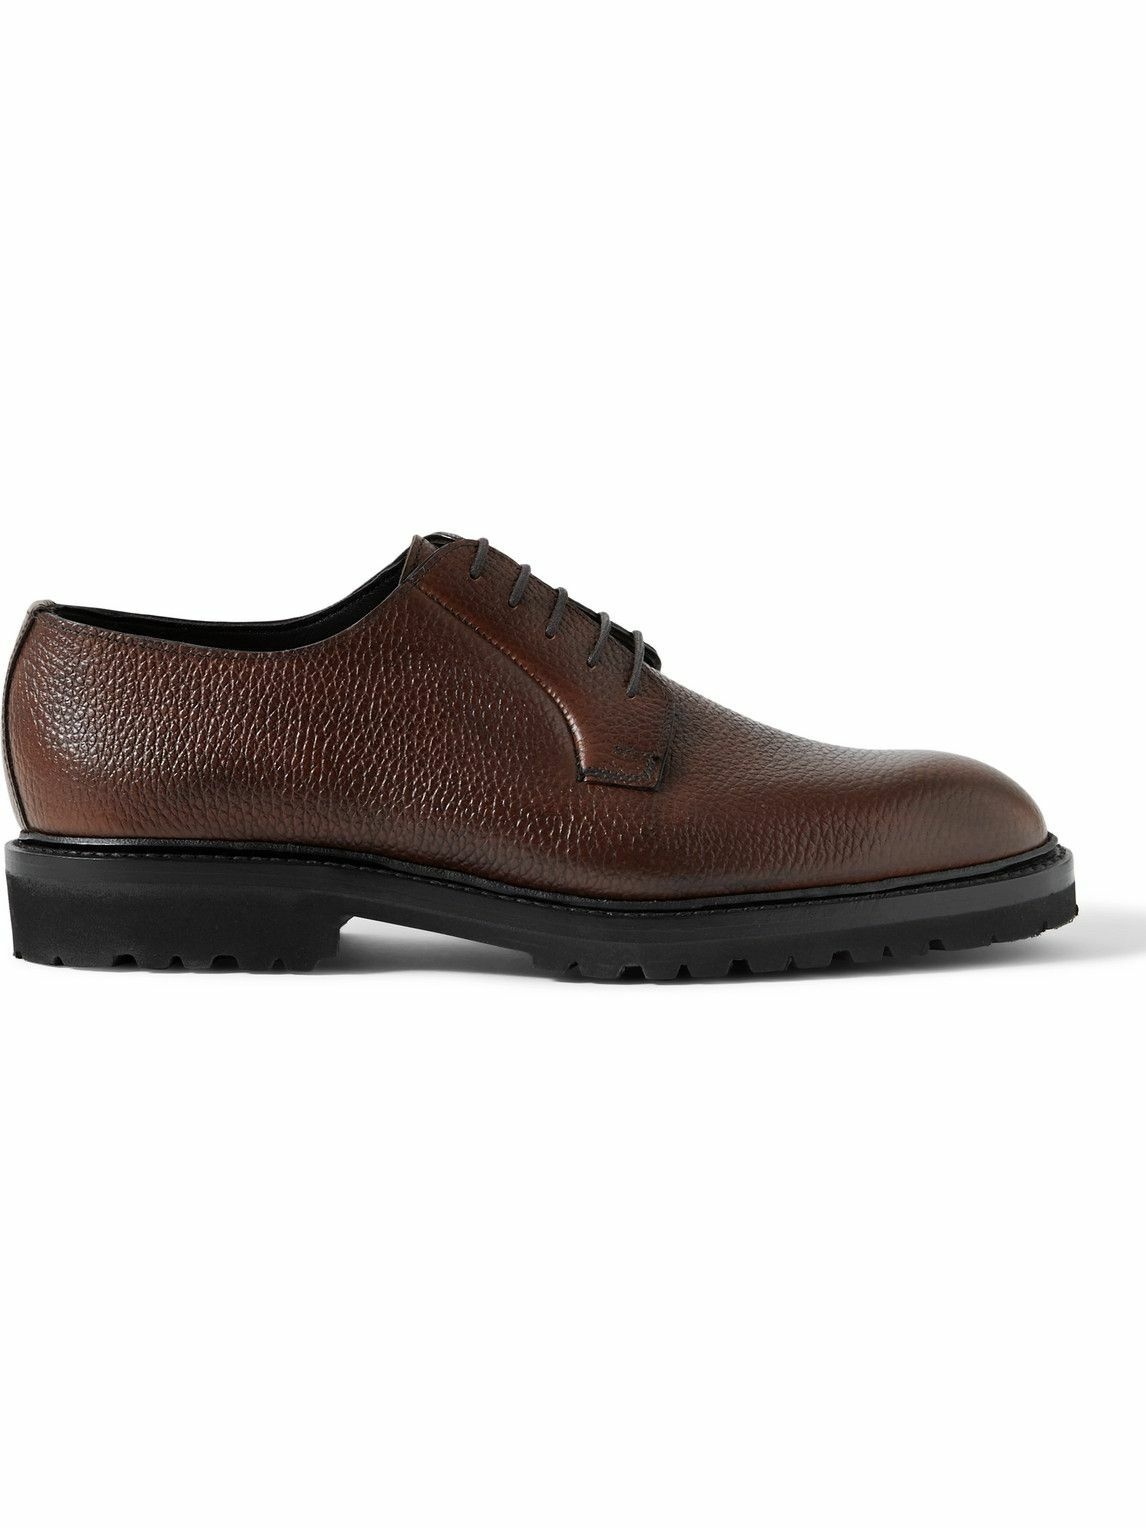 Photo: George Cleverley - Archie Full-Grain Leather Derby Shoes - Brown